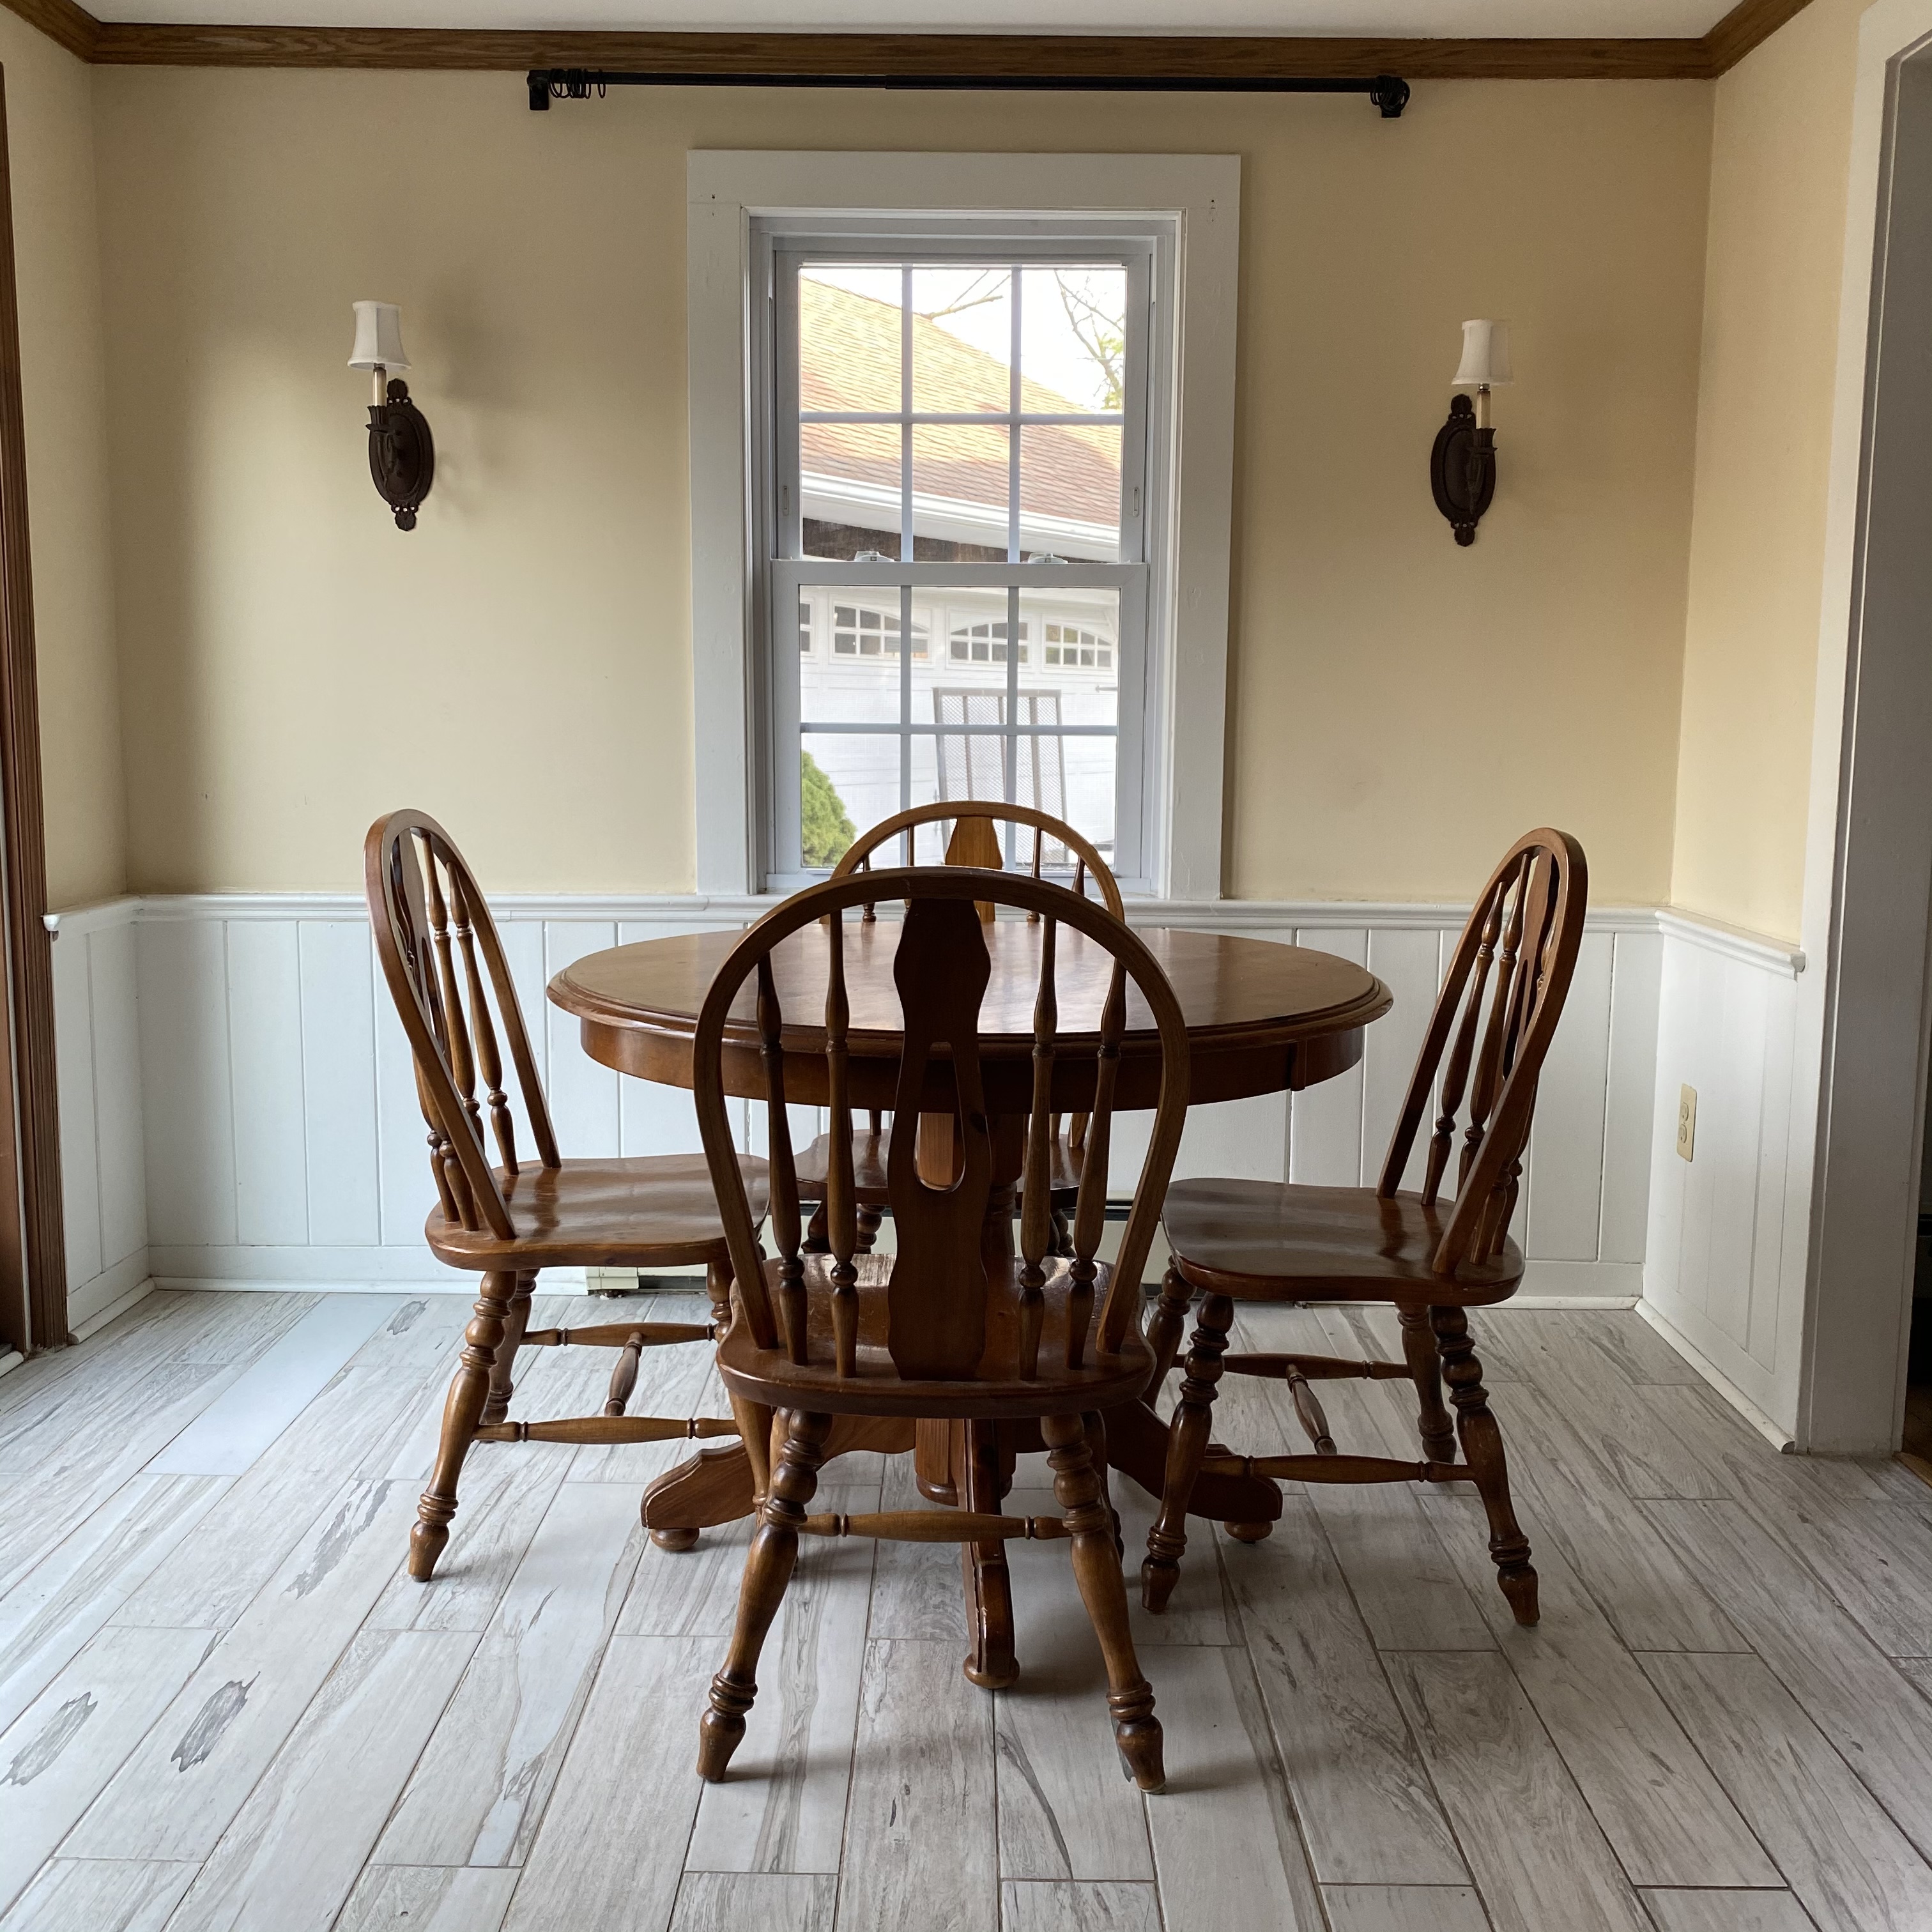 kitchen with stained wood table and chairs, white window and whitewashed floor